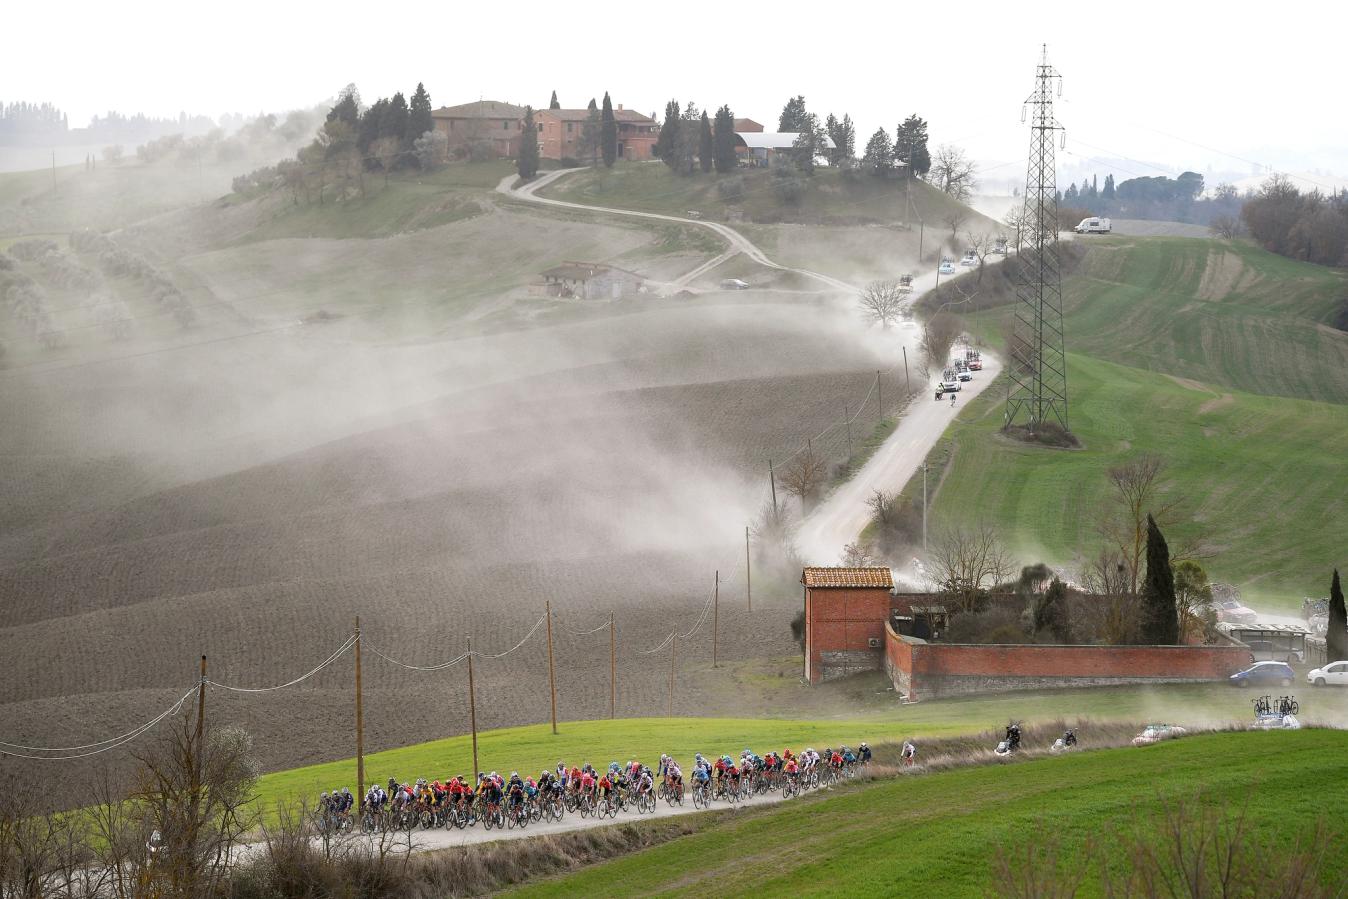 The riders kick up clouds of dust as they tackle the gravel tracks of Strade Bianche 